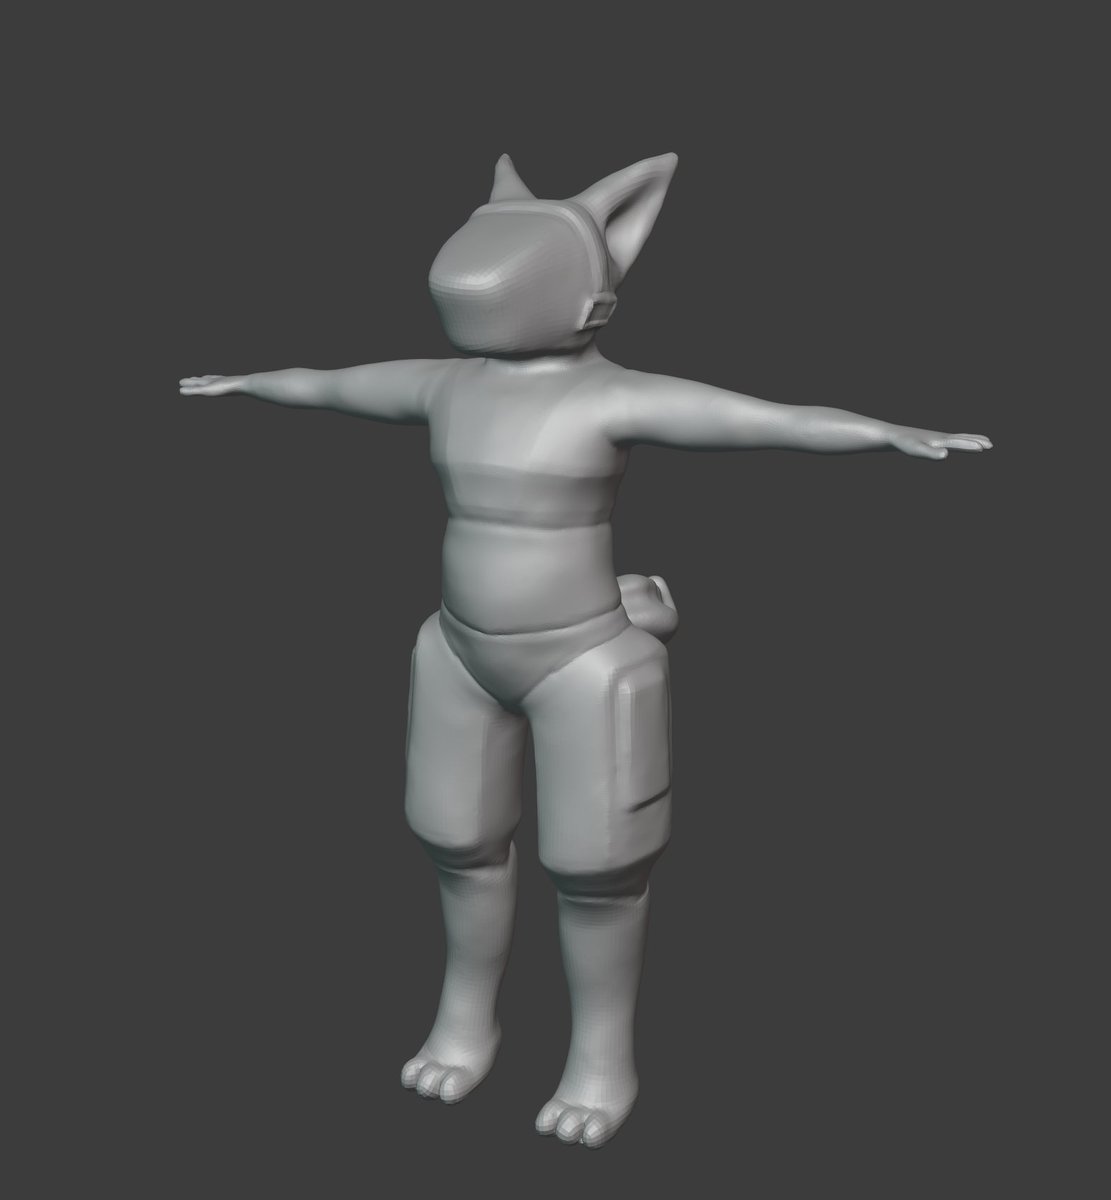 I've been tweaking around his proportions and HOLY SHIT WE'RE GETTING CLOSE NOW. Hands are still weird, ears need a little help, and the tail is still atrocious, but HOT DAMN we're doing pretty good tonight! MCUH better than last night